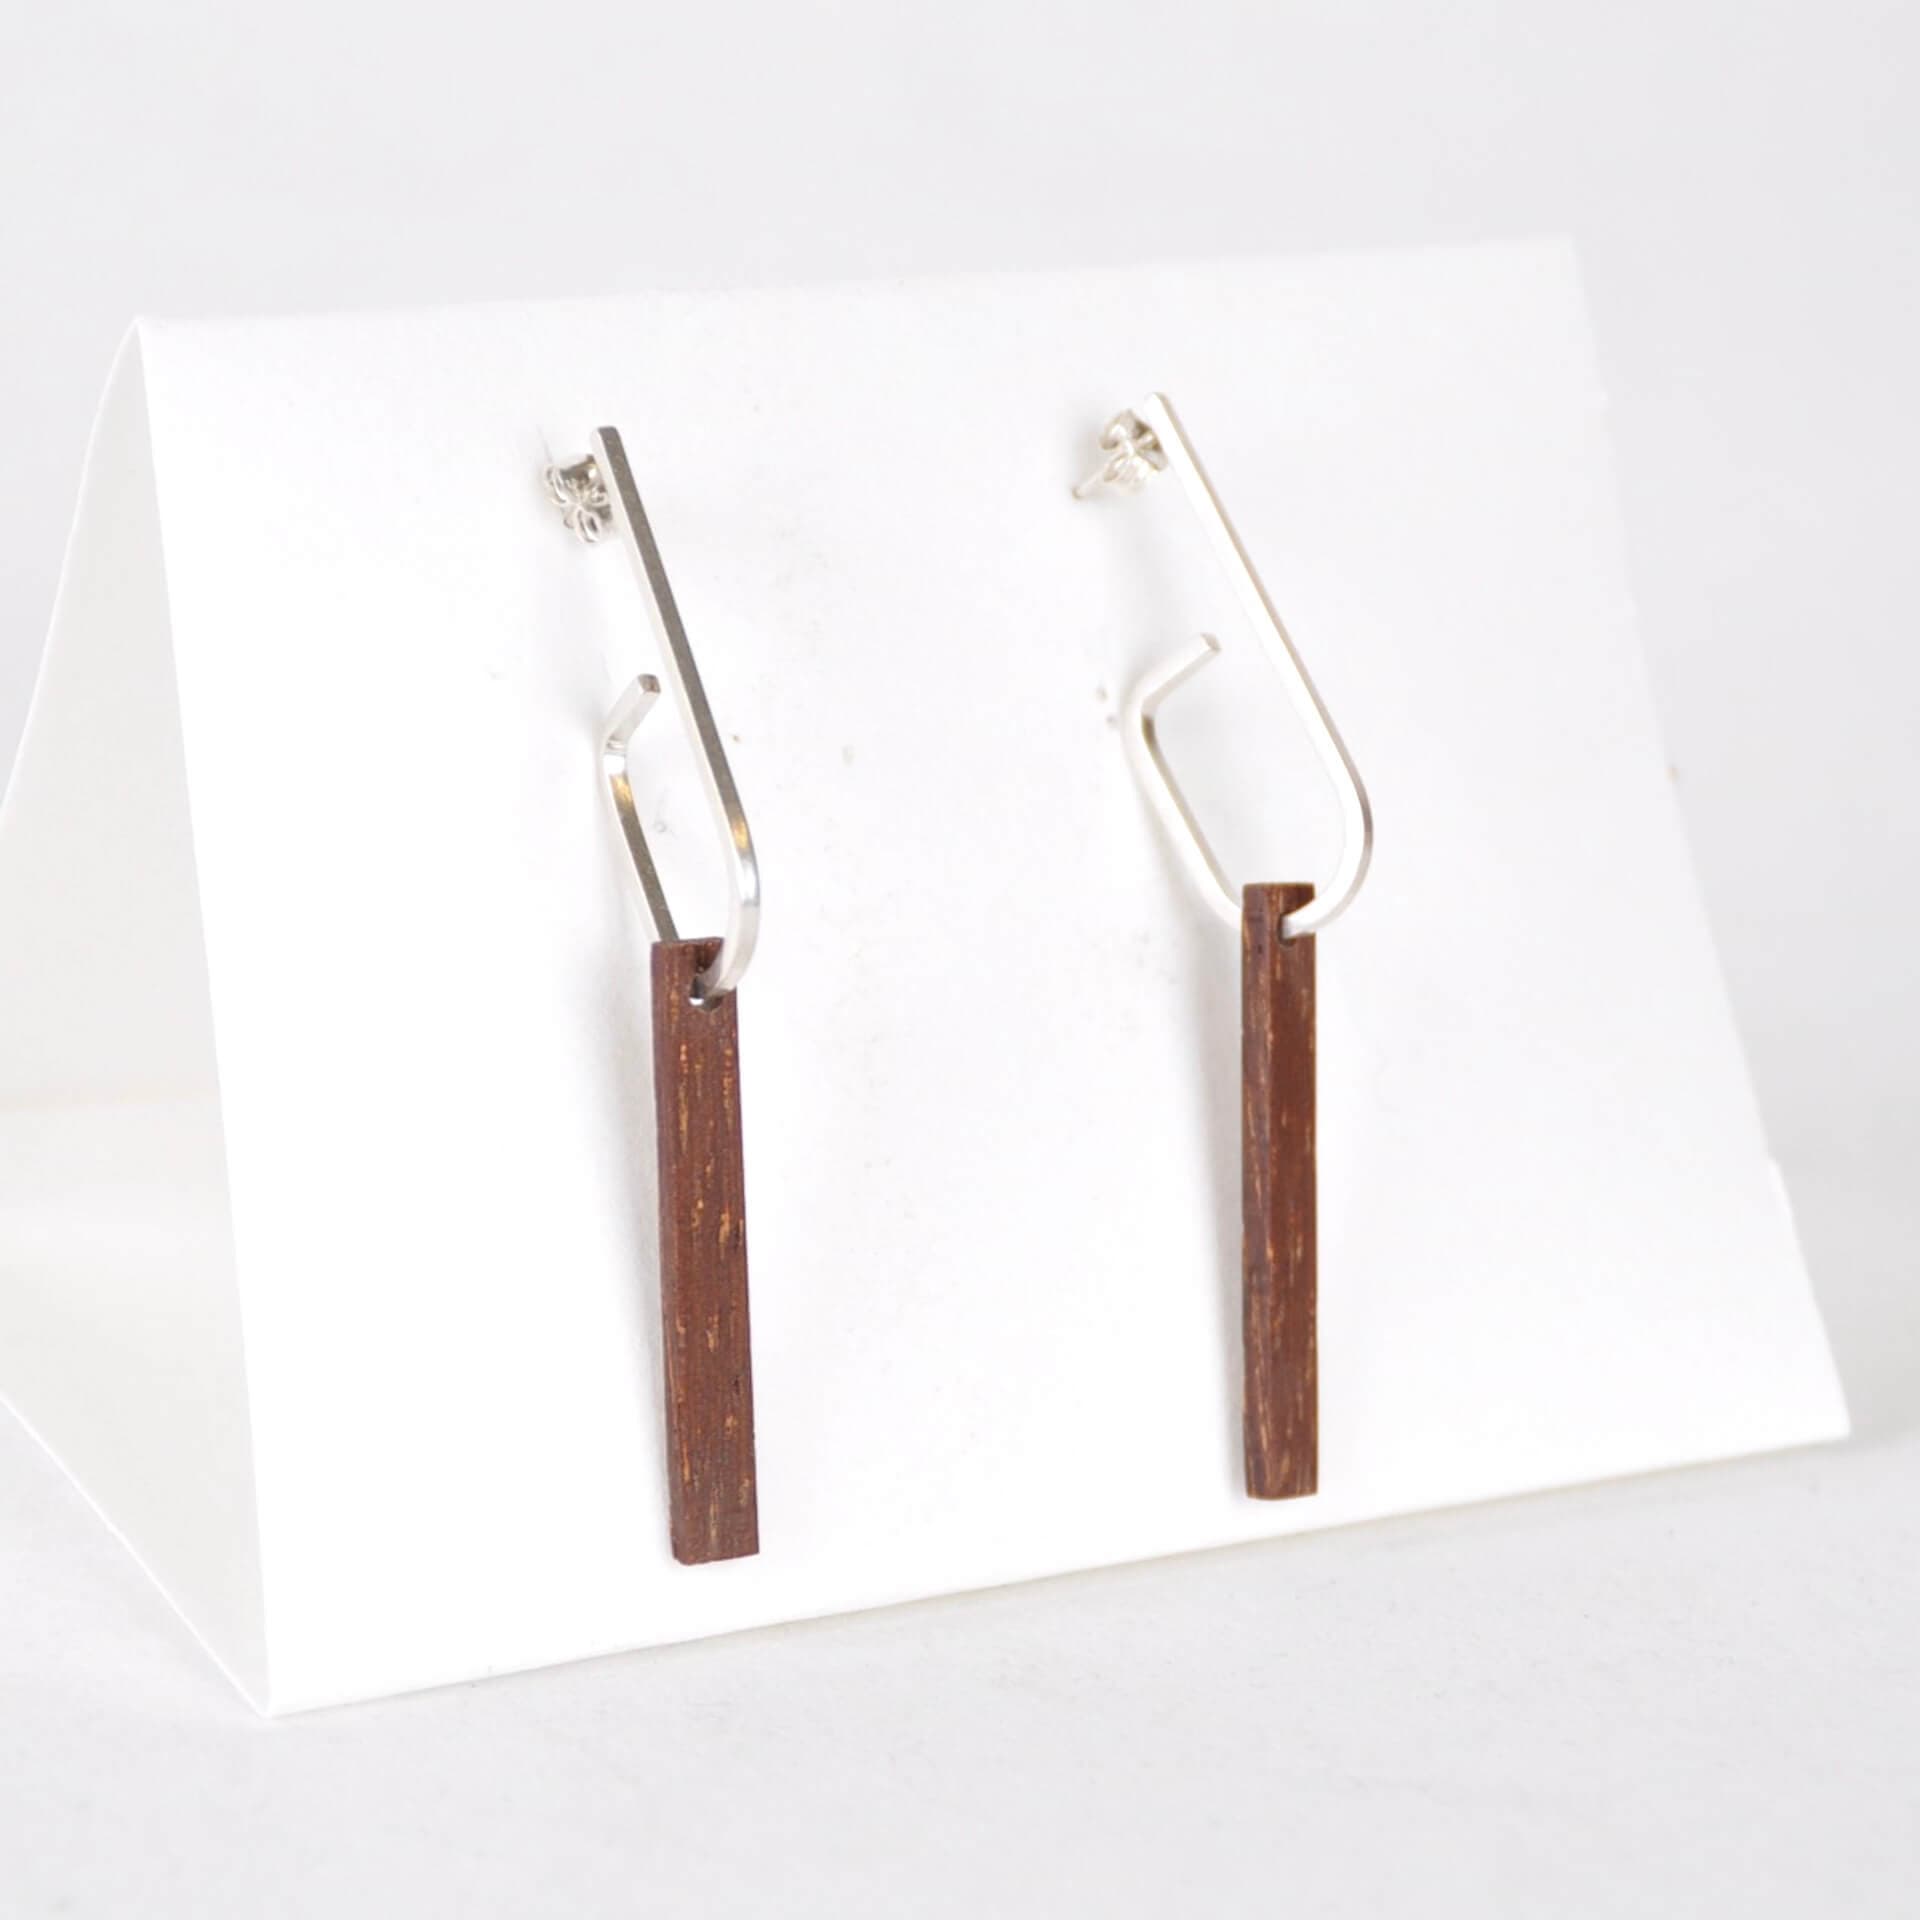 Priormade Woods b - Jarrah ‘Jay x Wood ’ - Eco Silver and Reclaimed Wooden Earrings (multiple styles)